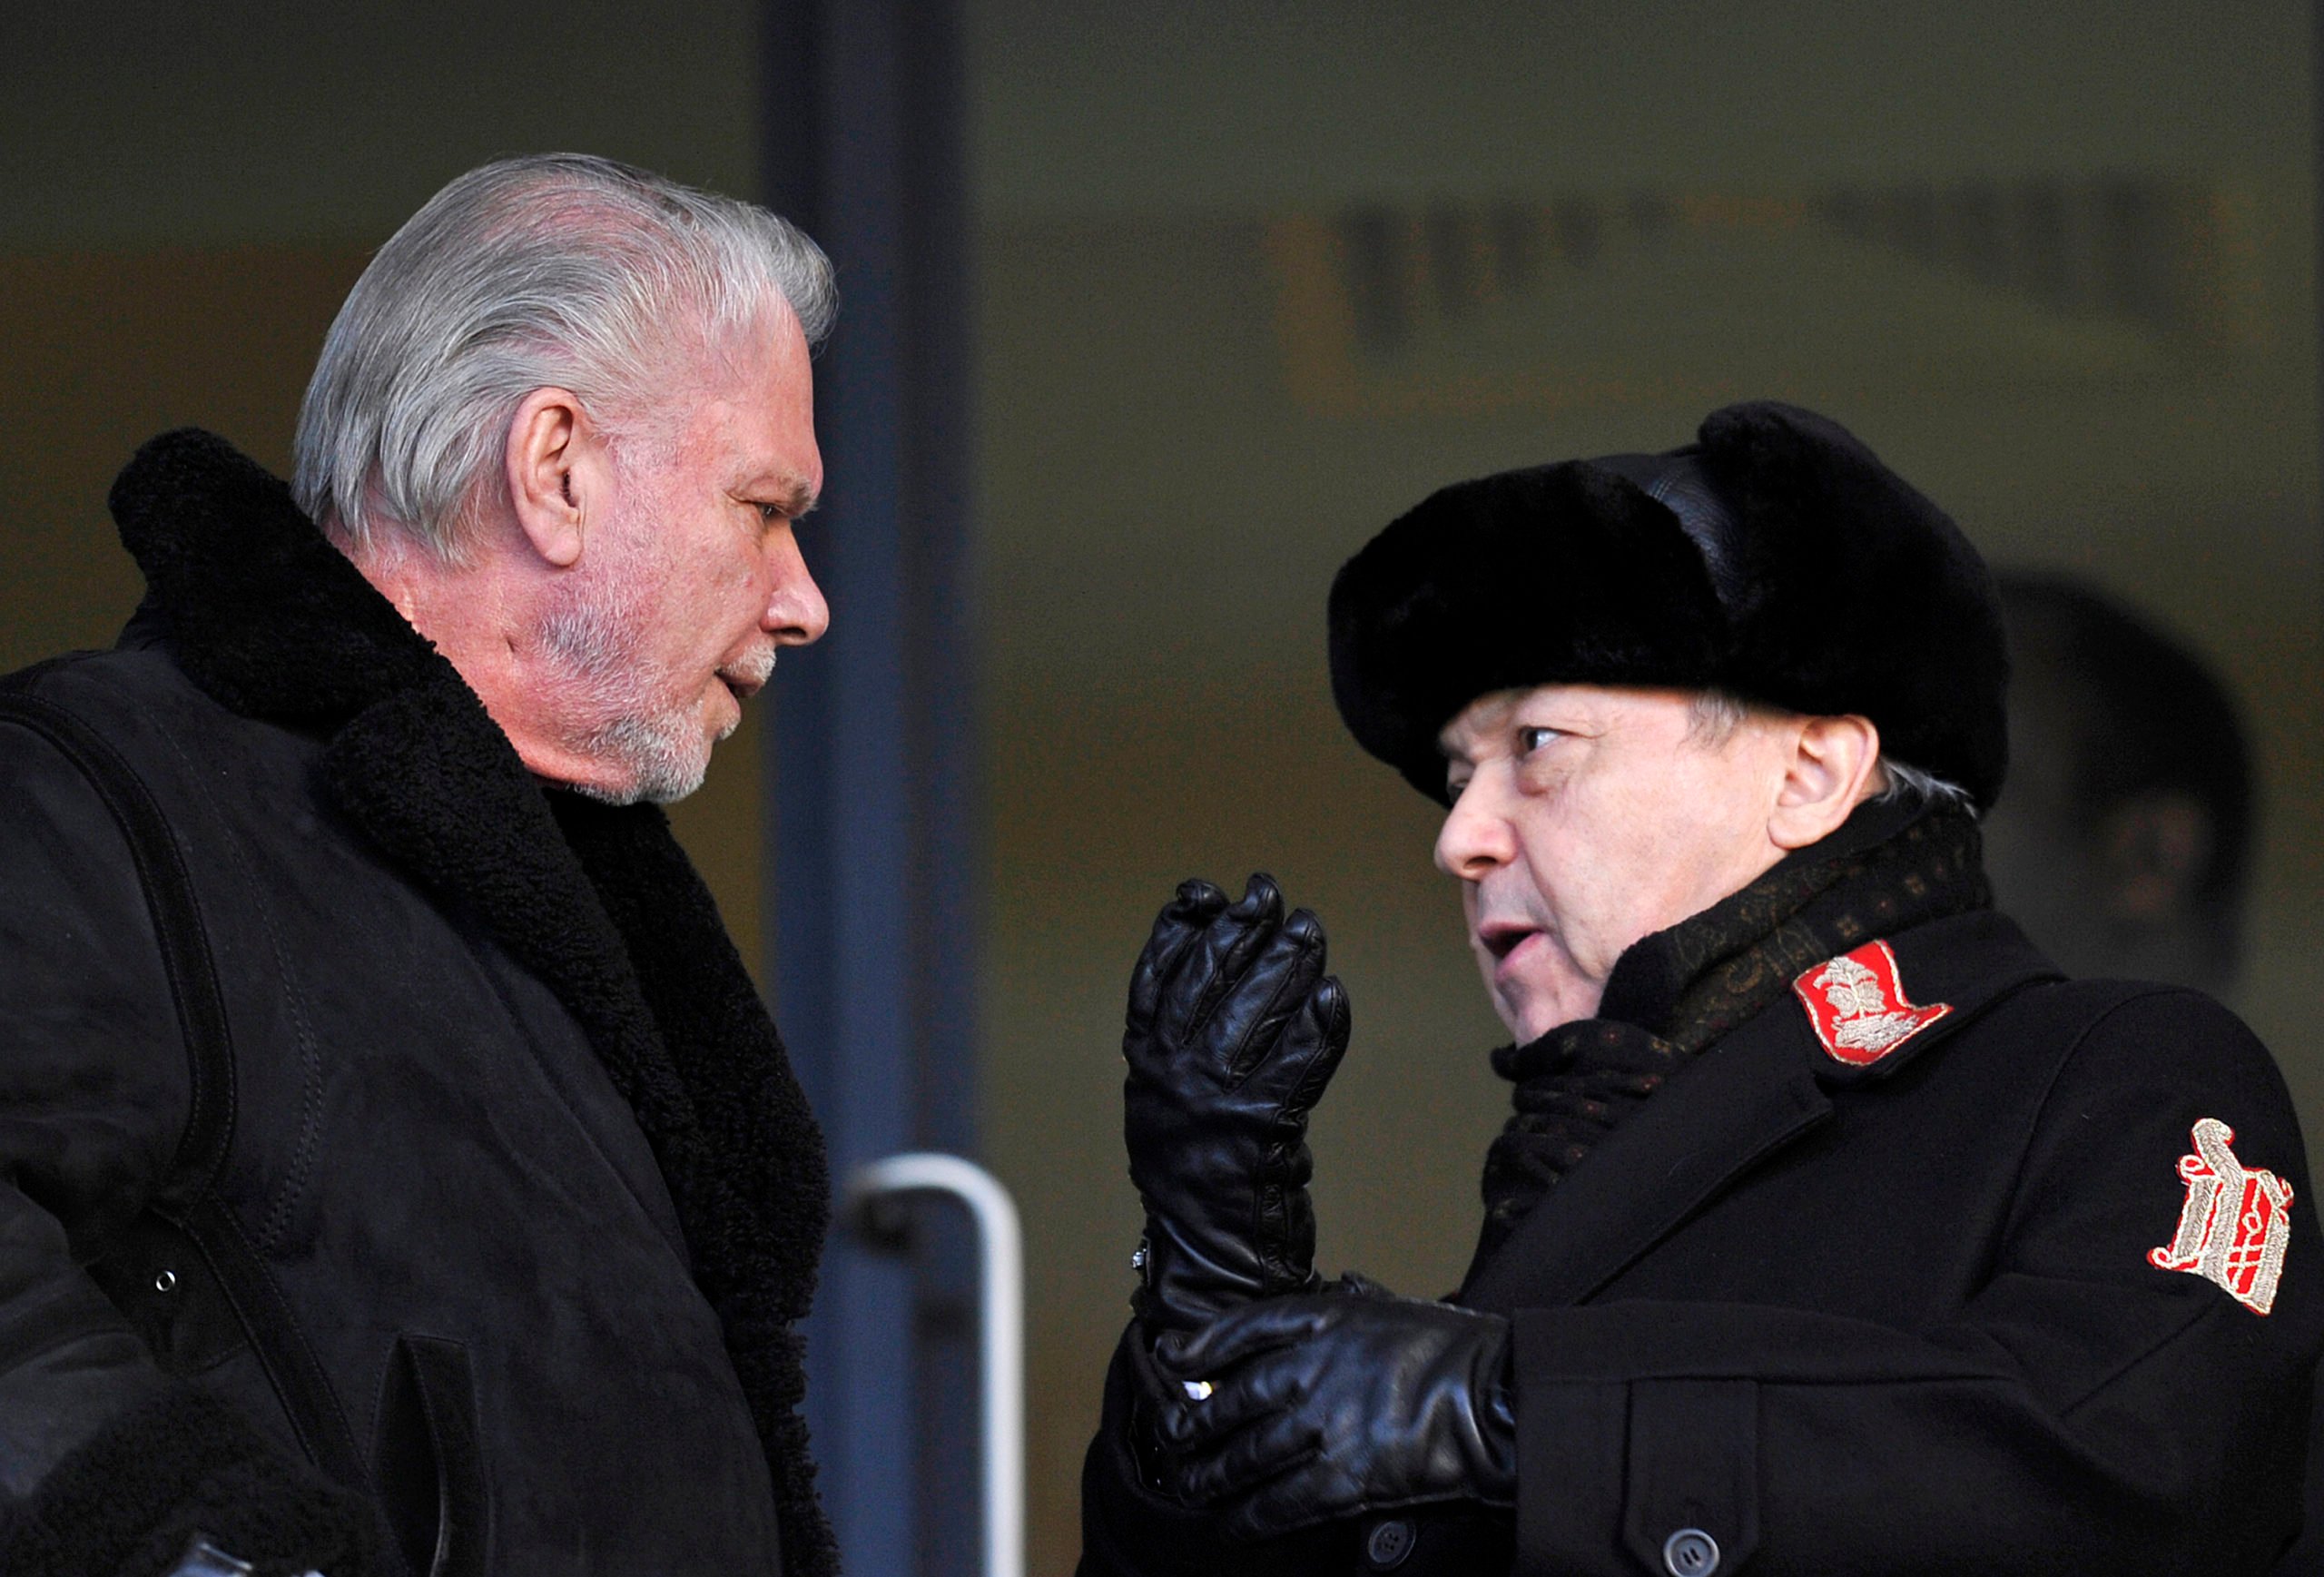 Jim White insists he is 'no mouthpiece' for West Ham owners David Sullivan and David Gold and criticises sceptical fans